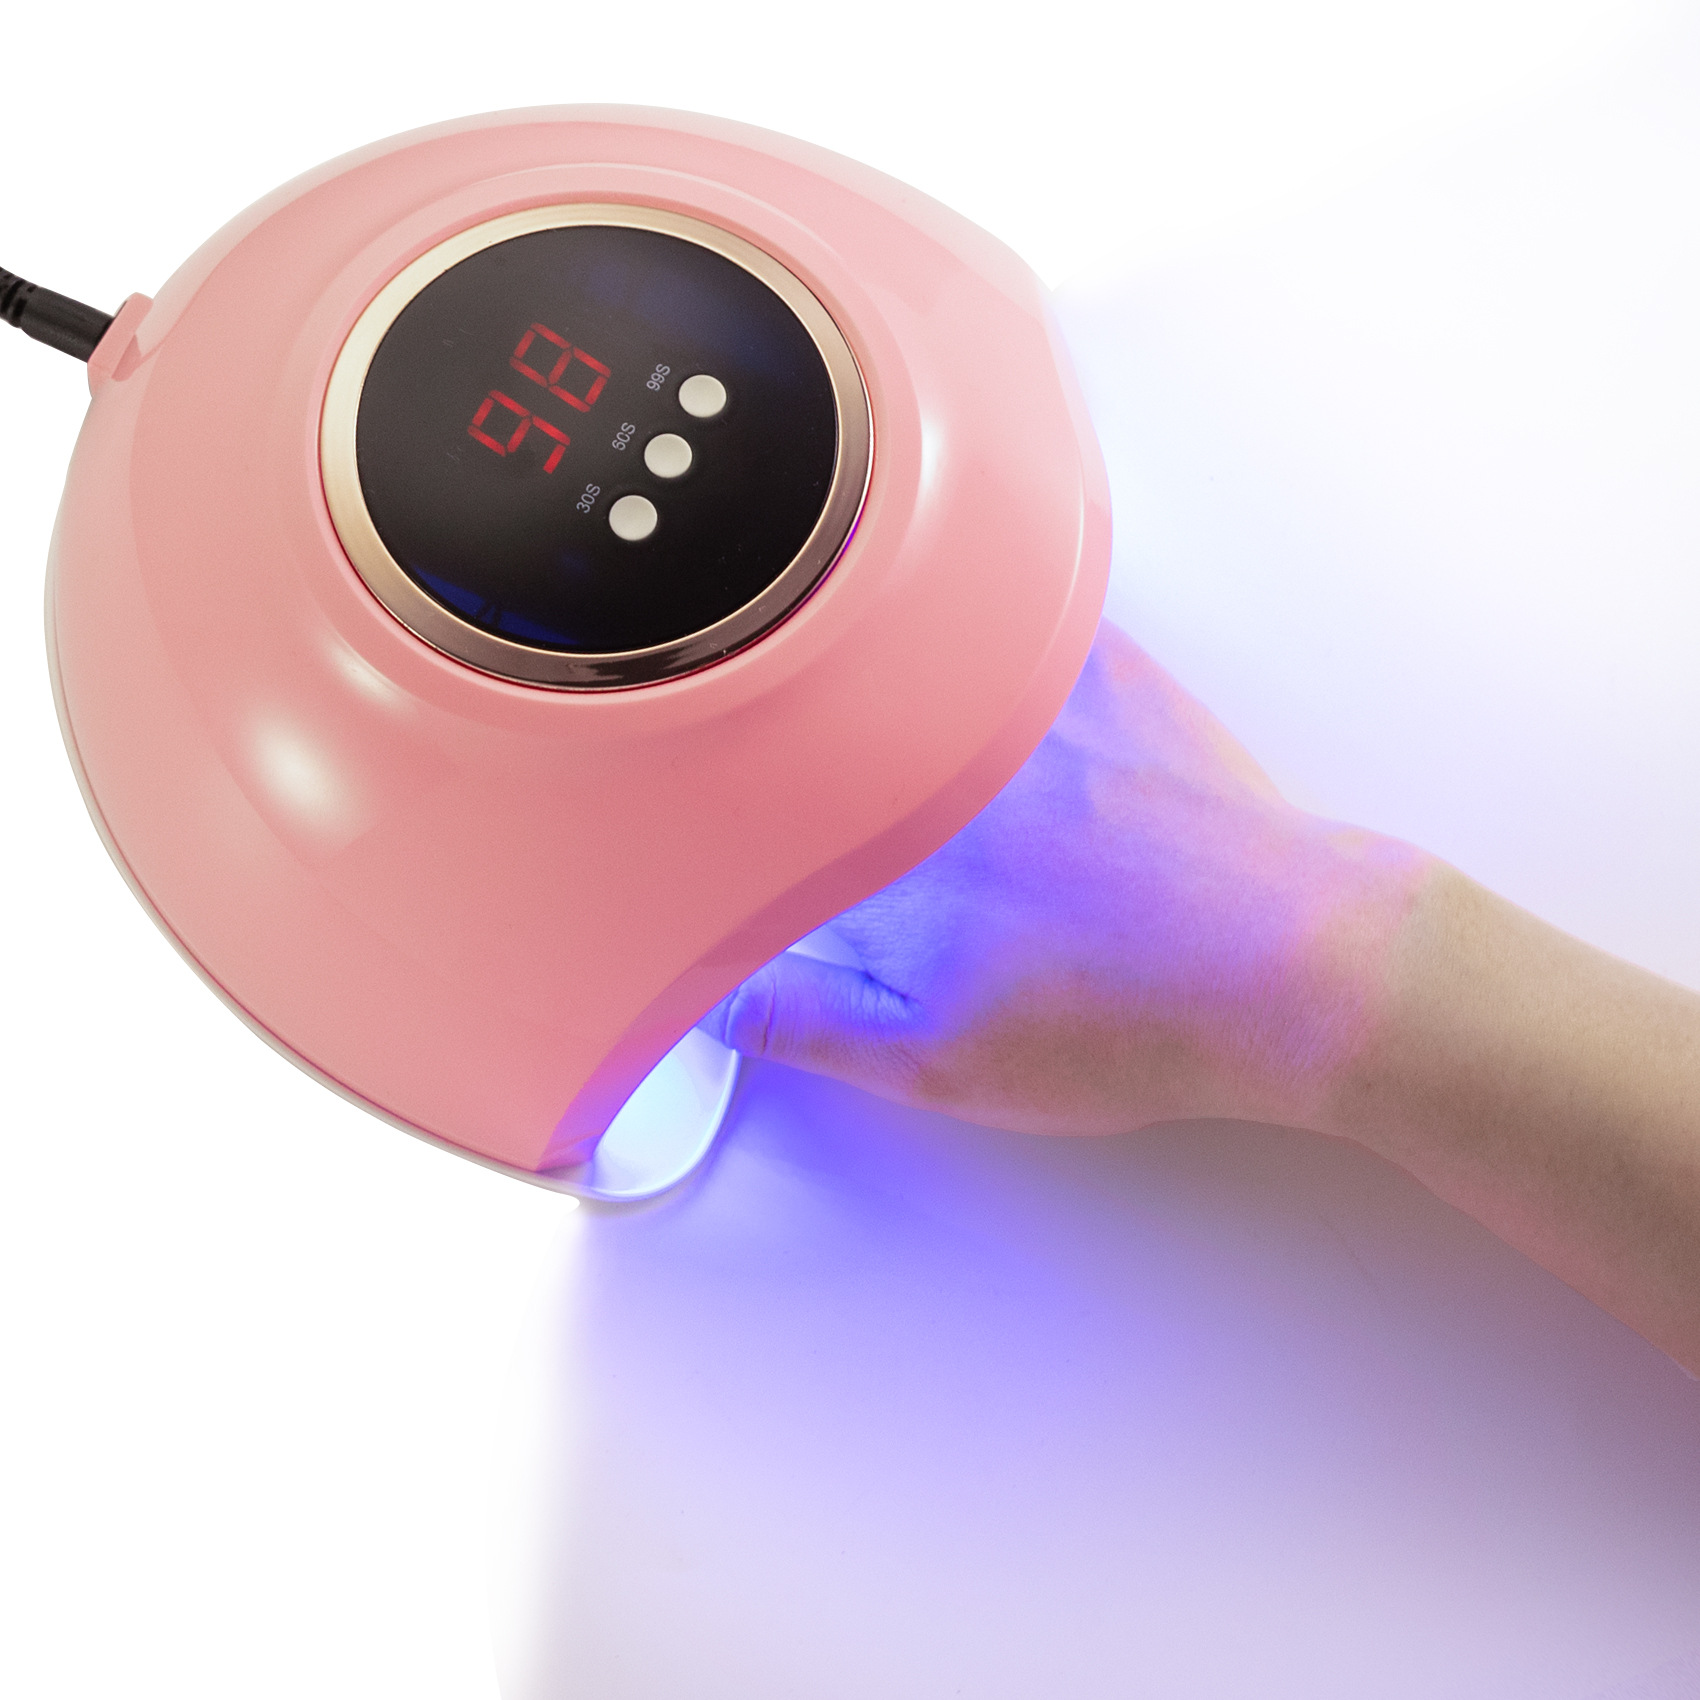 Cross-Border New Arrival 72W High Power Nail Phototherapy Machine Fast UV Ultraviolet LED Heating Lamp Manicure Equipment 30 Beads